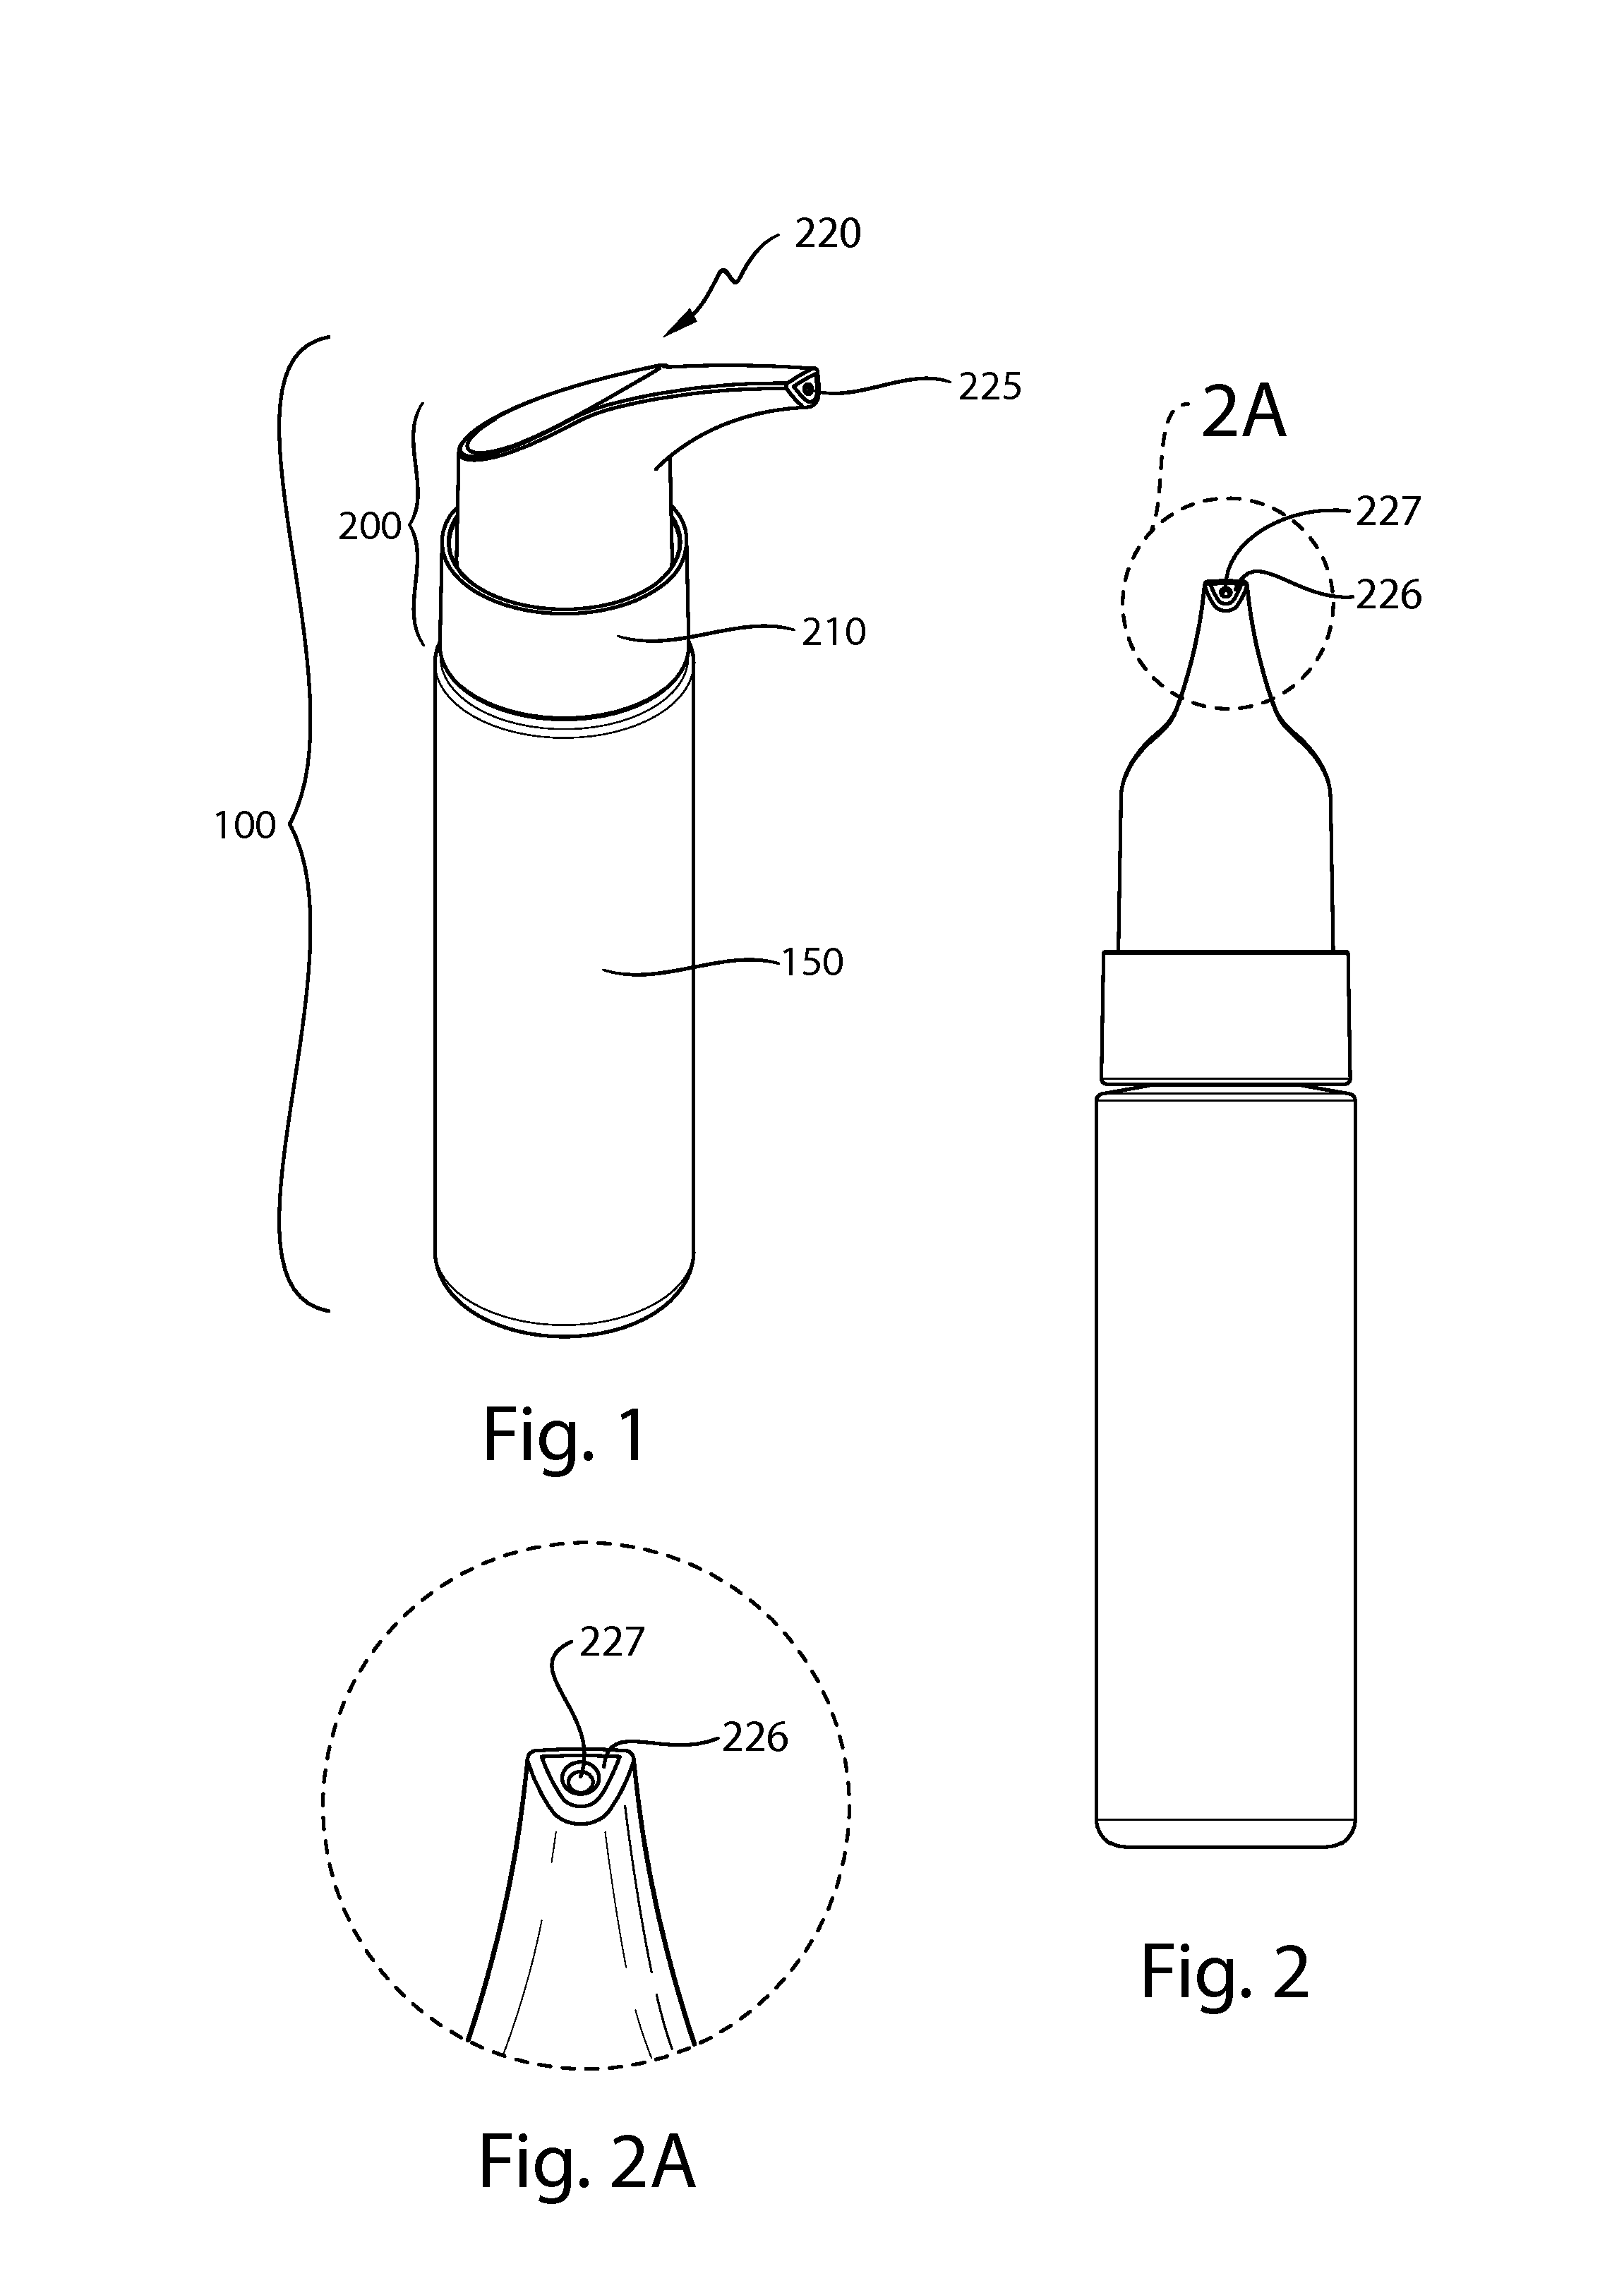 Applicator Assembly for Applying a Composition